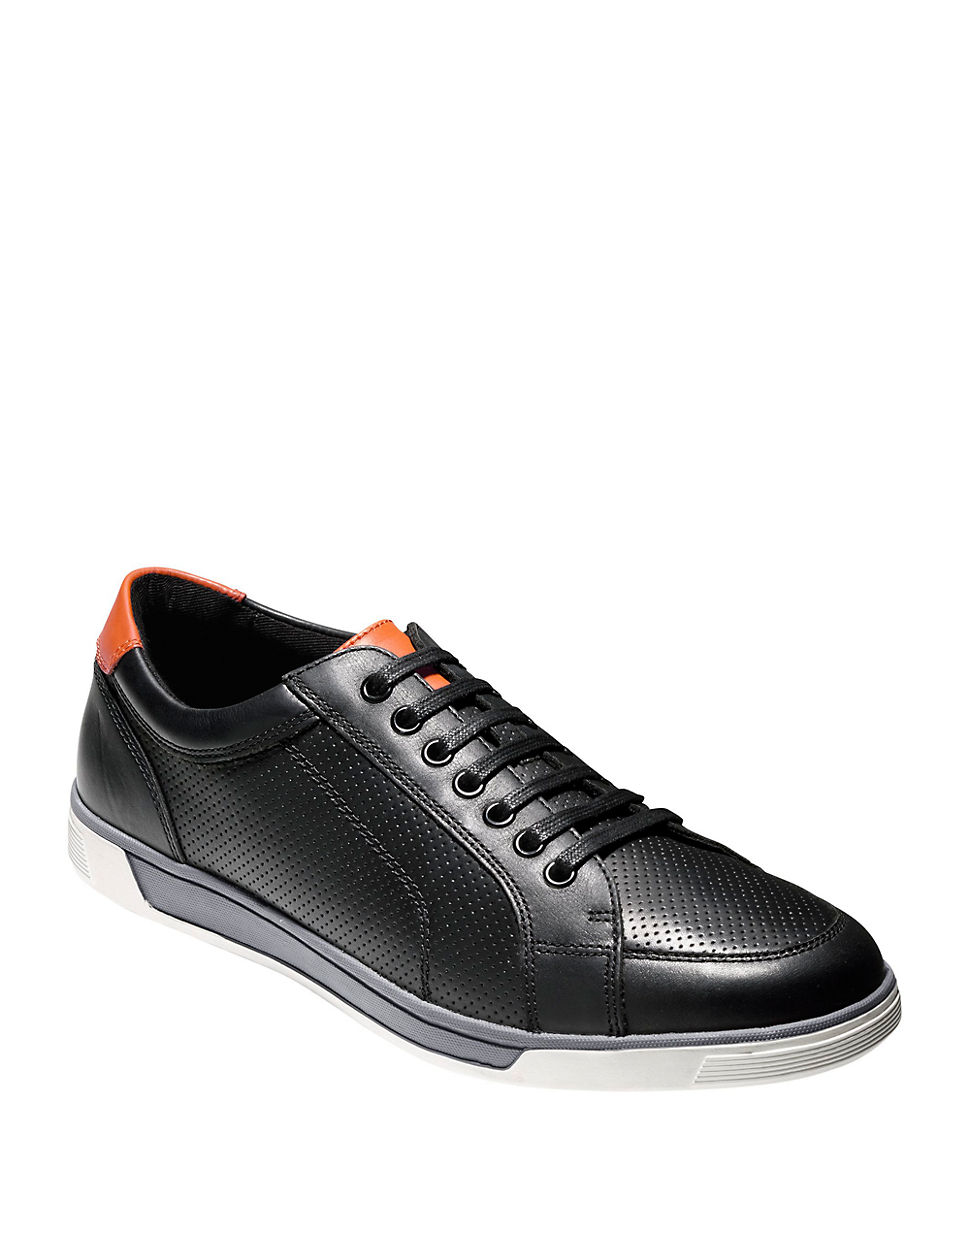 Lyst - Cole Haan Leather Lace-up Sneakers in Black for Men